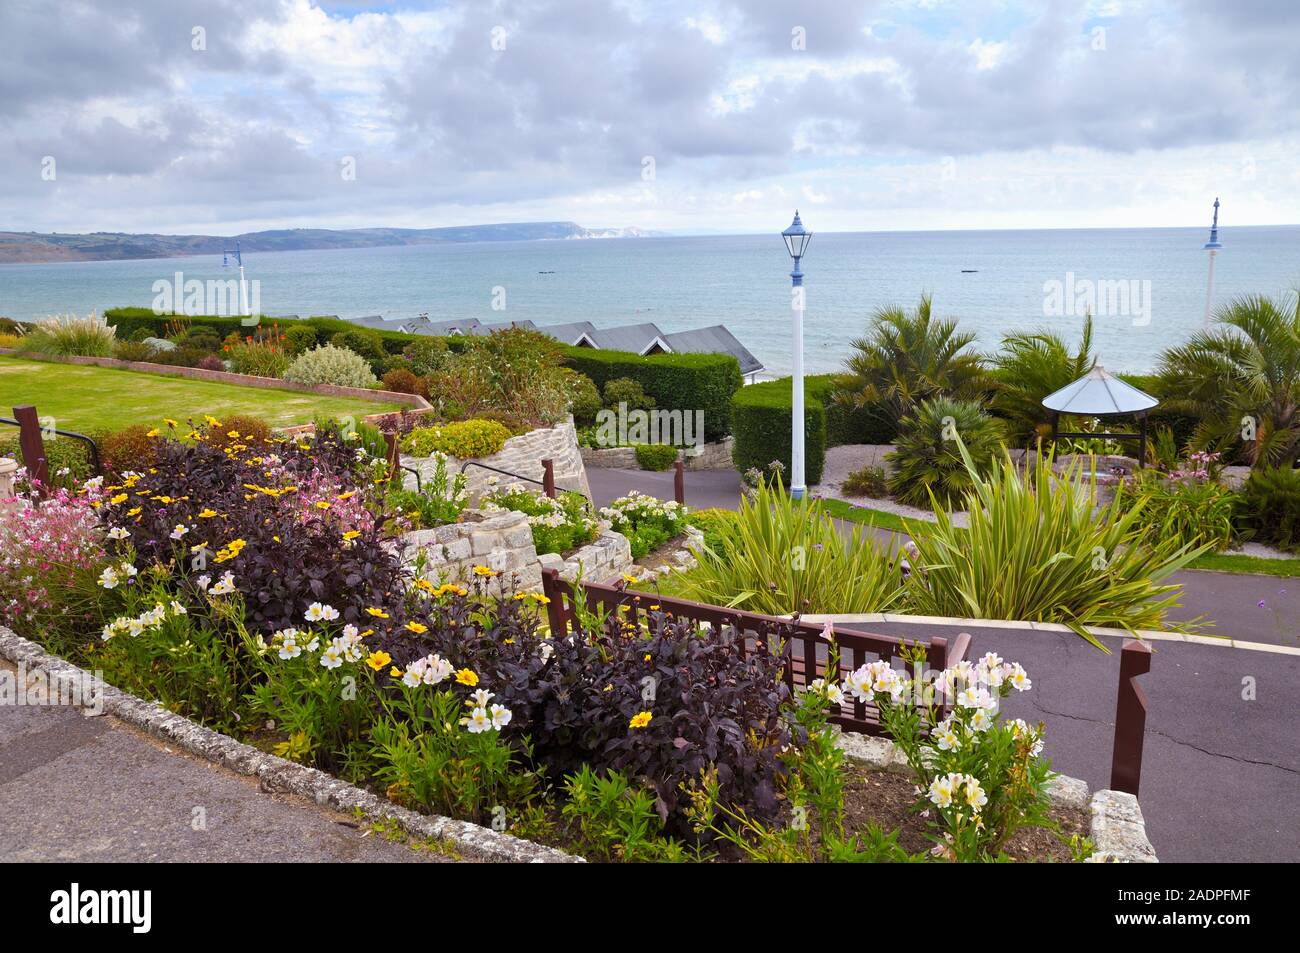 A sea view from Greenhill Gardens above the seafront promenade at Weymouth, Jurassic Coast, Dorset, England, UK Stock Photo